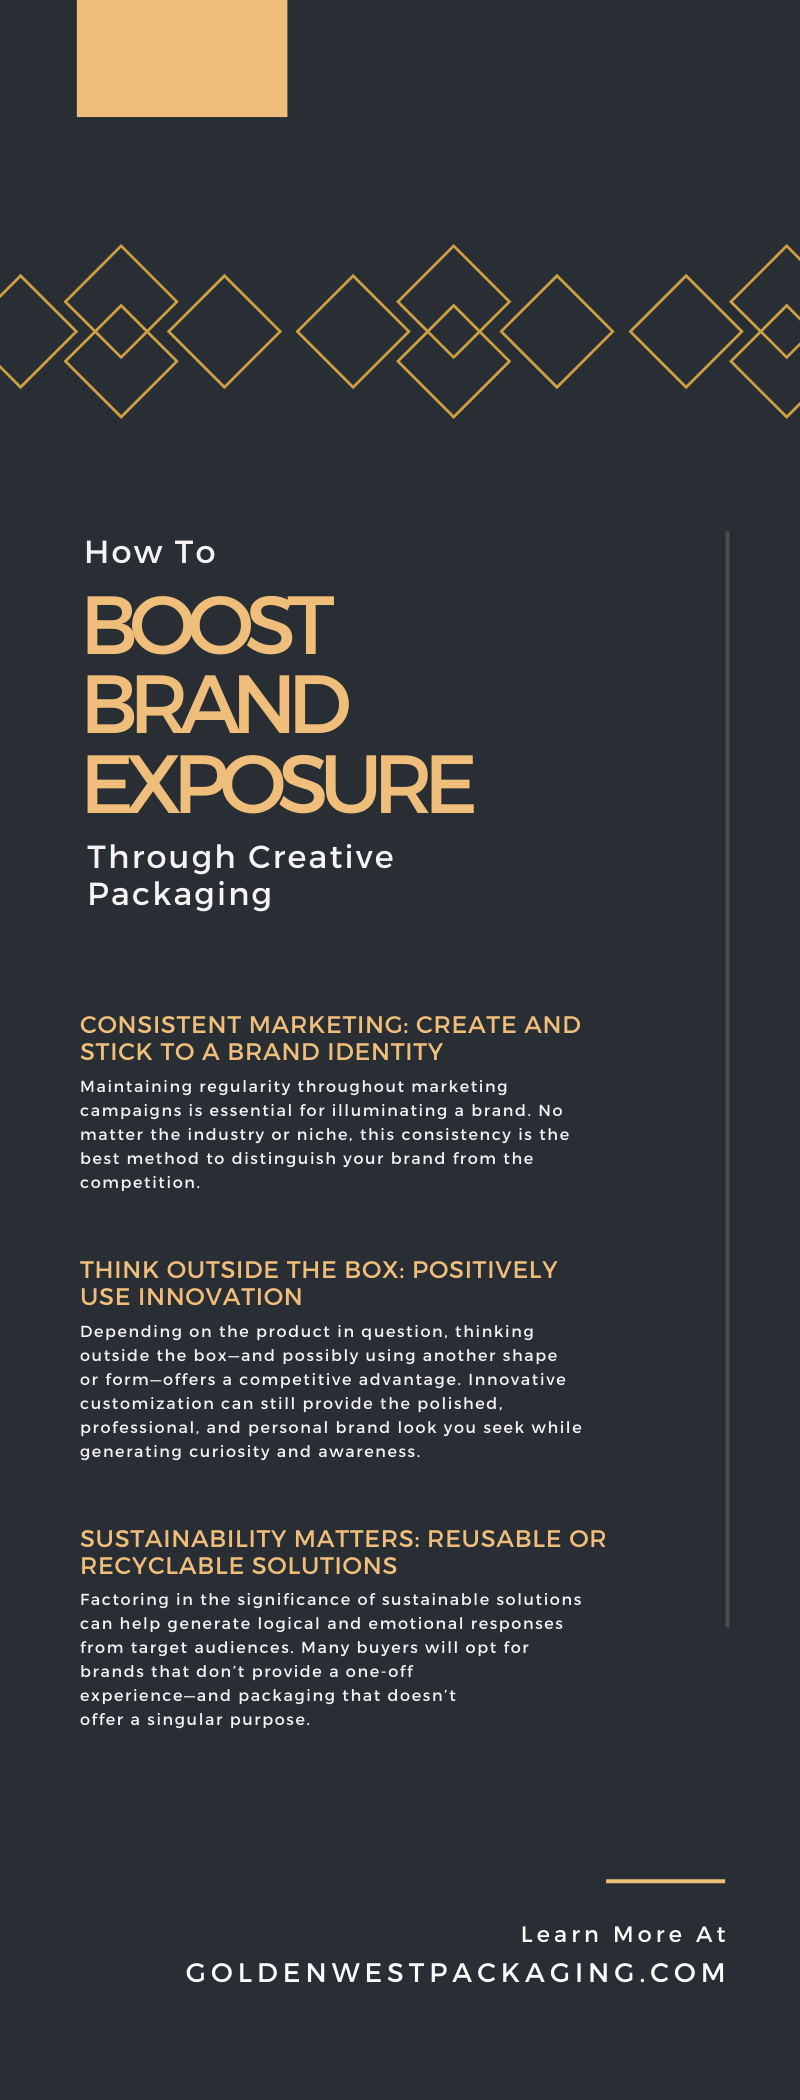 How To Boost Brand Exposure Through Creative Packaging